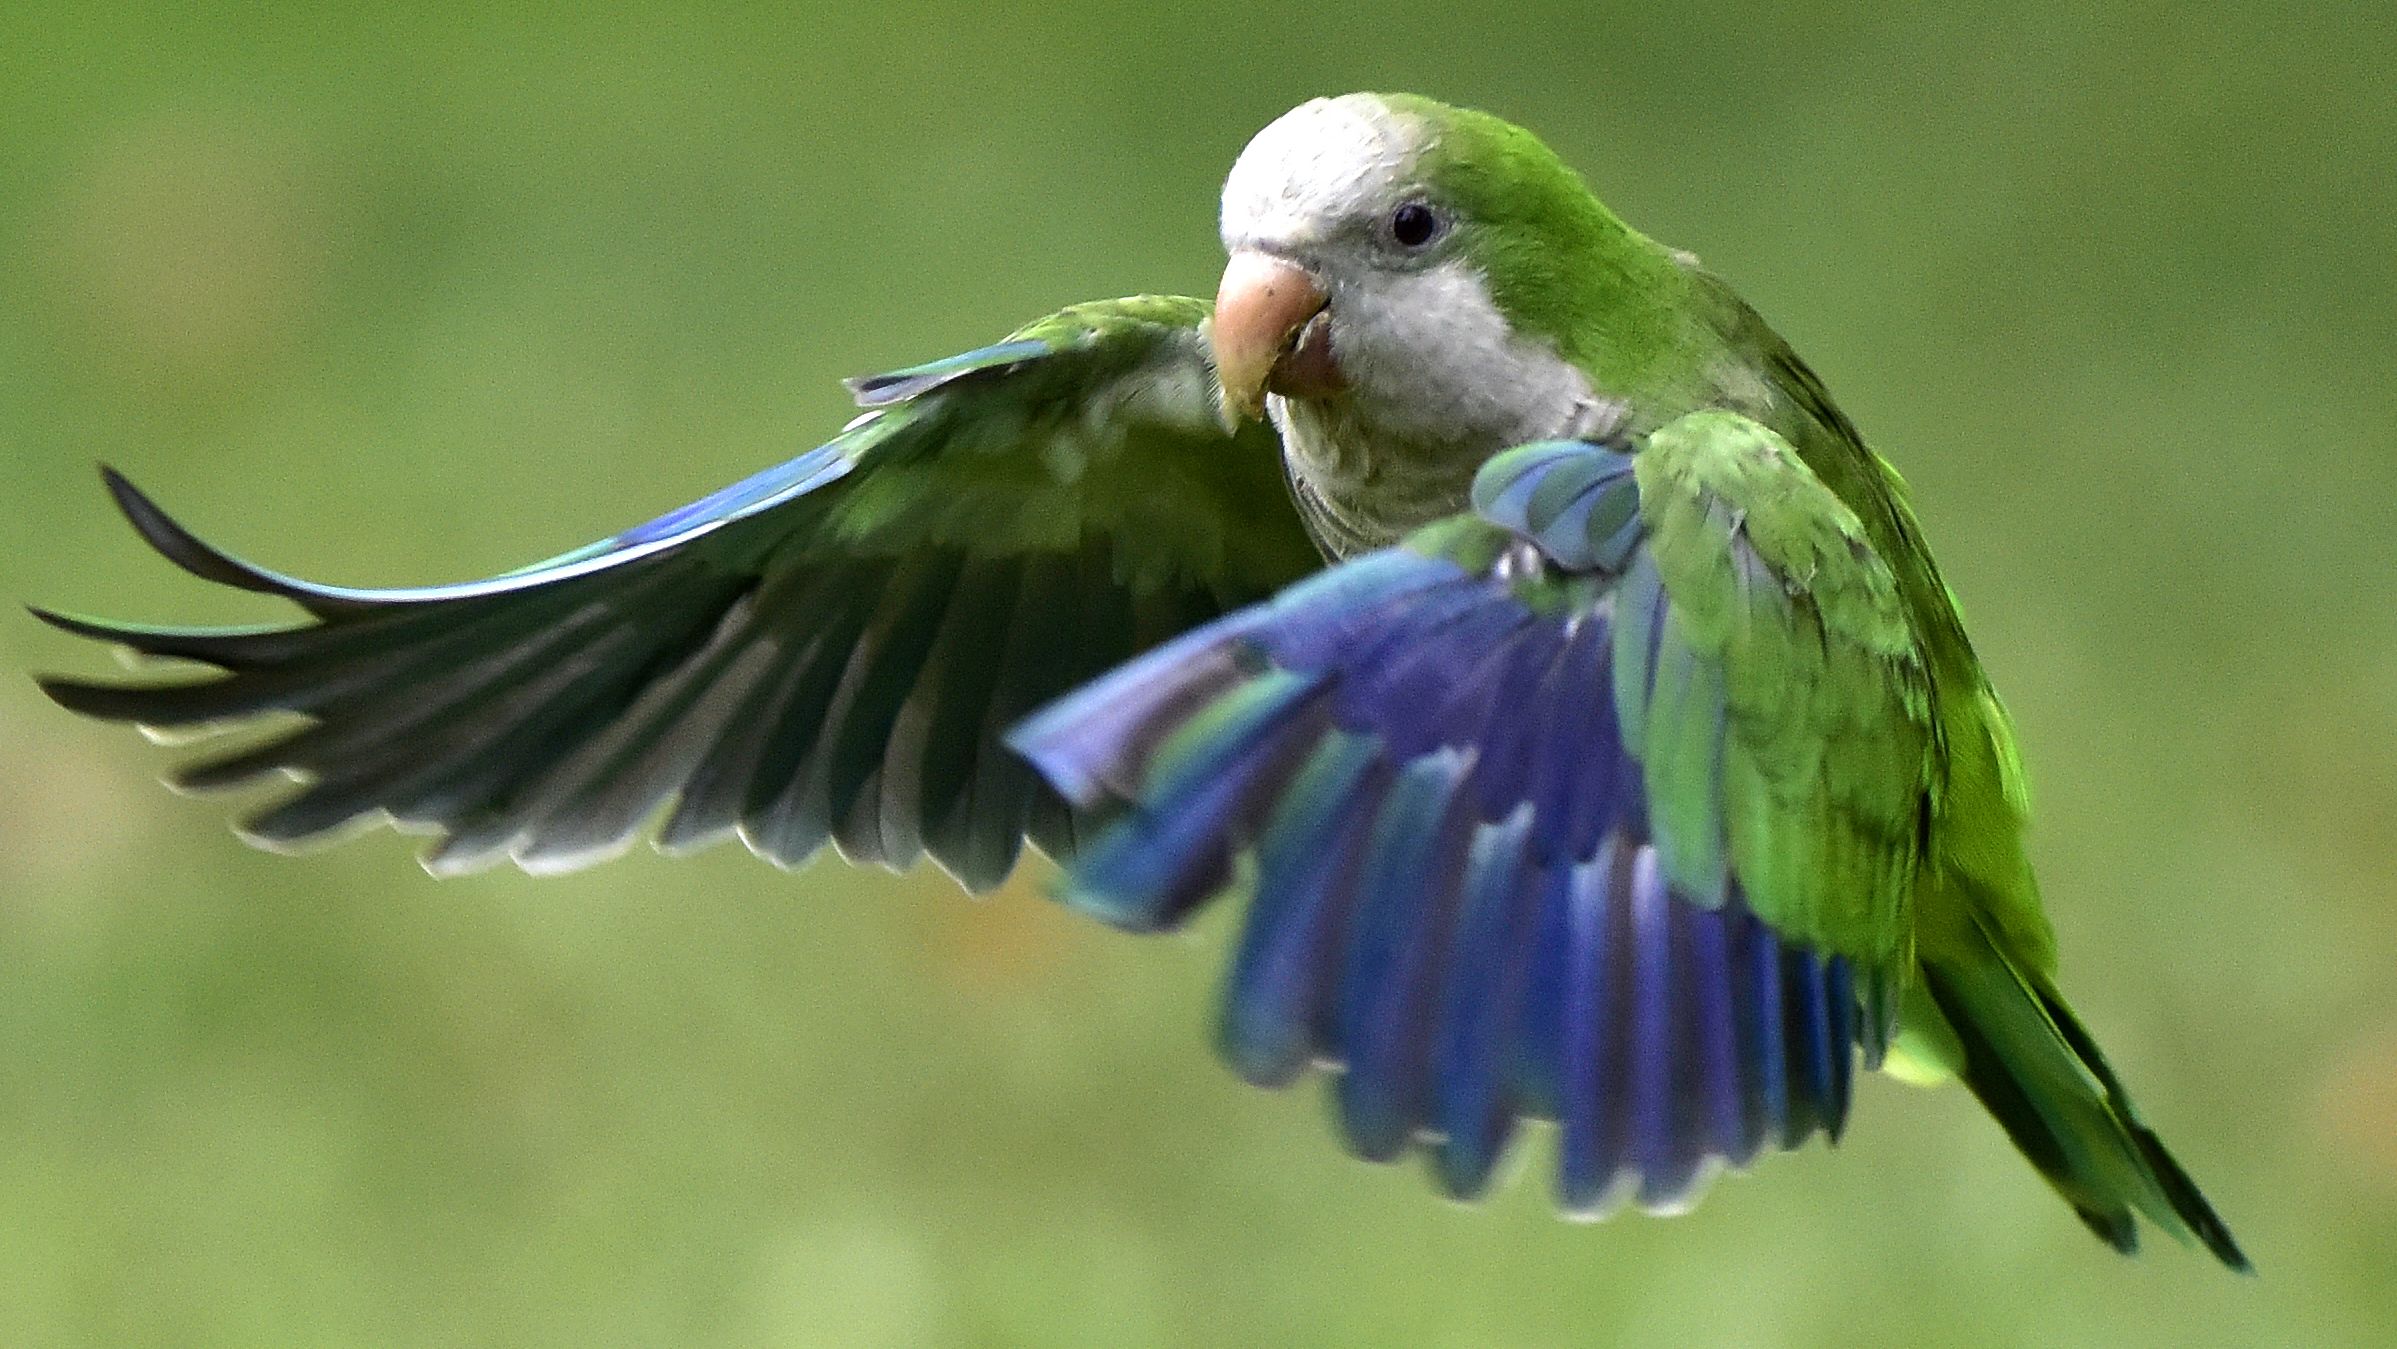 The monk parakeet, known an invasive species in Spain, is facing a cull after causing problems for local residents and threatening biodiversity. 